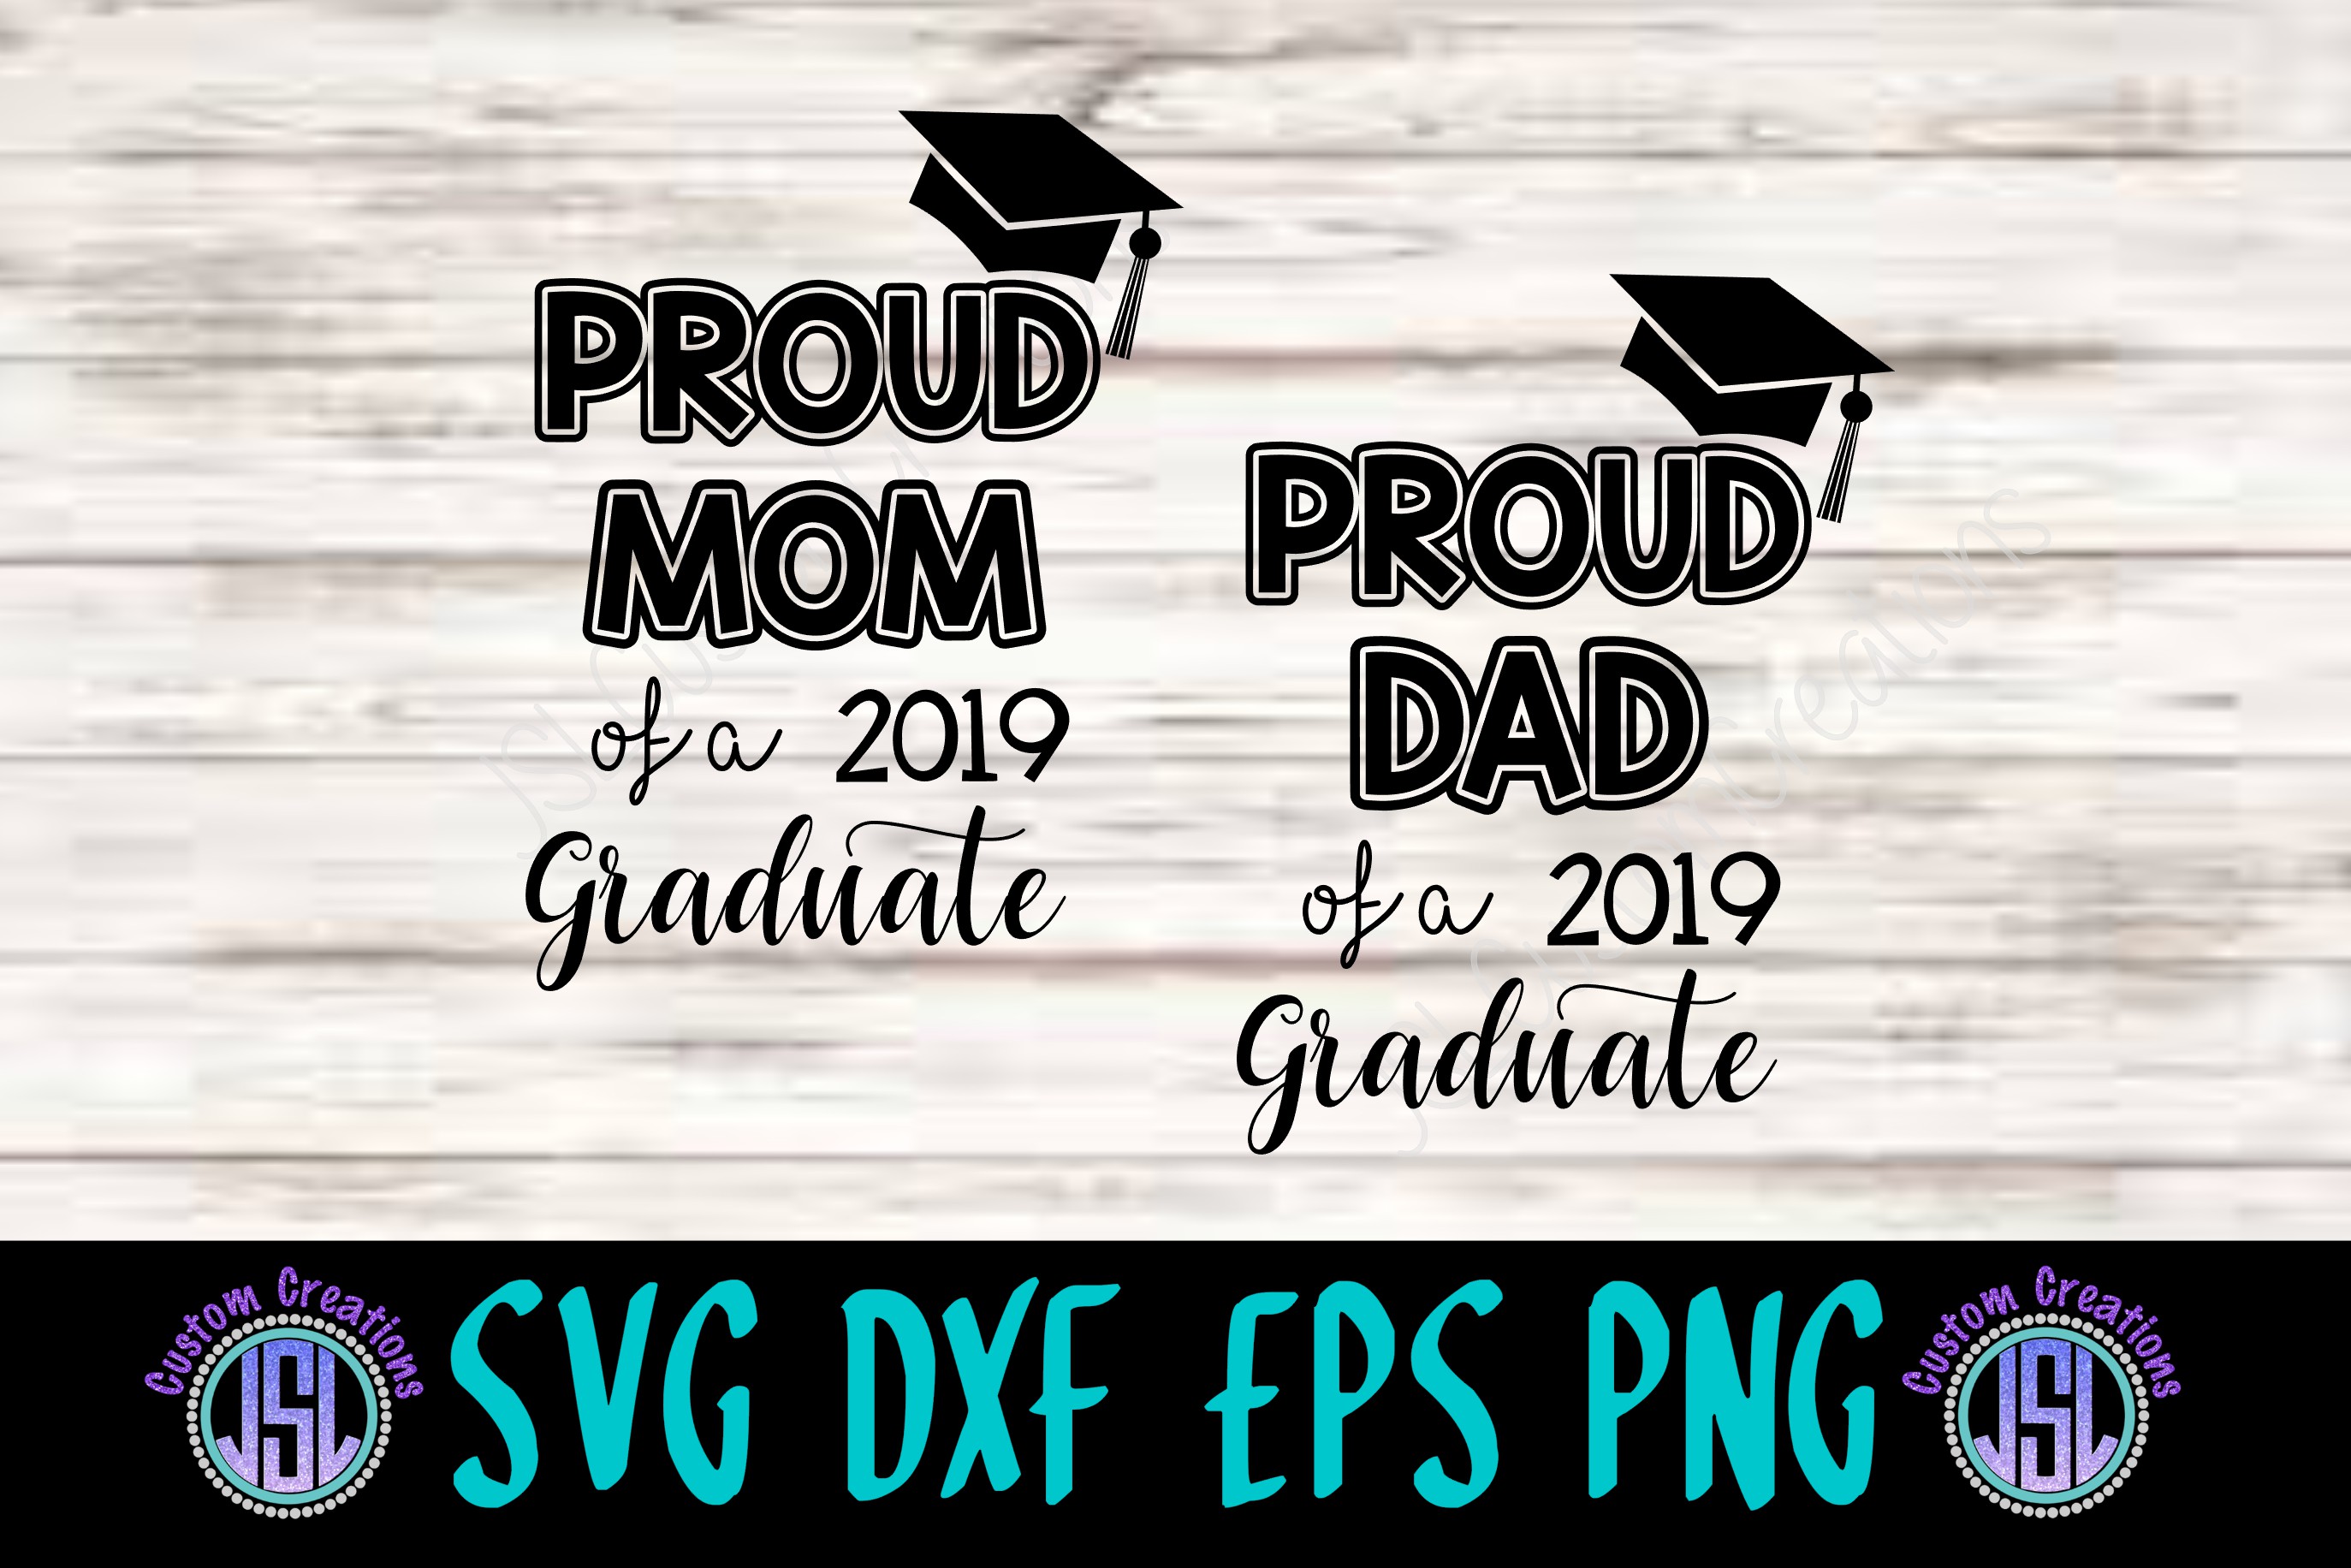 Proud Mom, Dad of a 2019 Graduate| SVG DXF EPS PNG Files ...